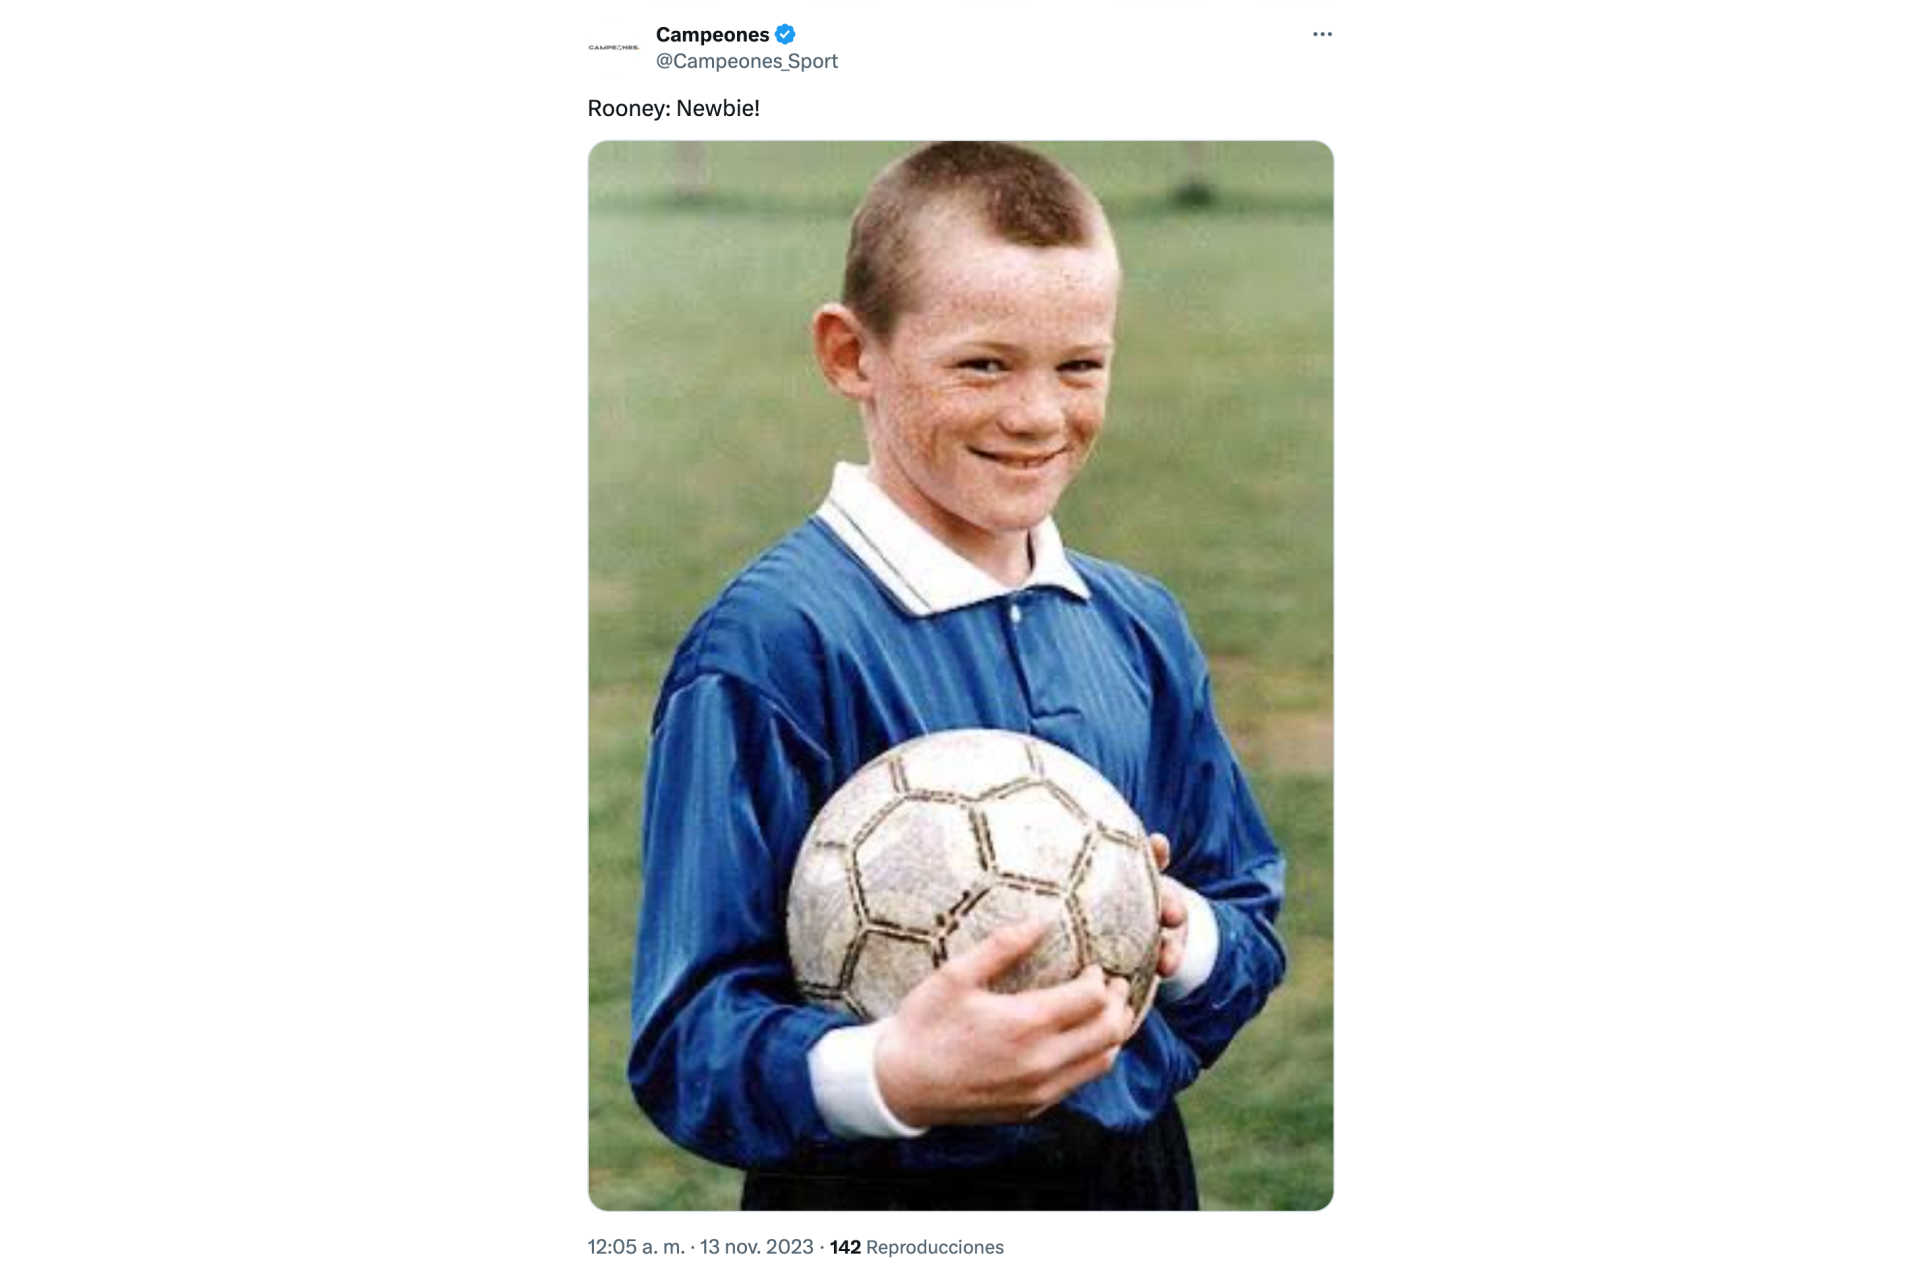 A young Rooney?